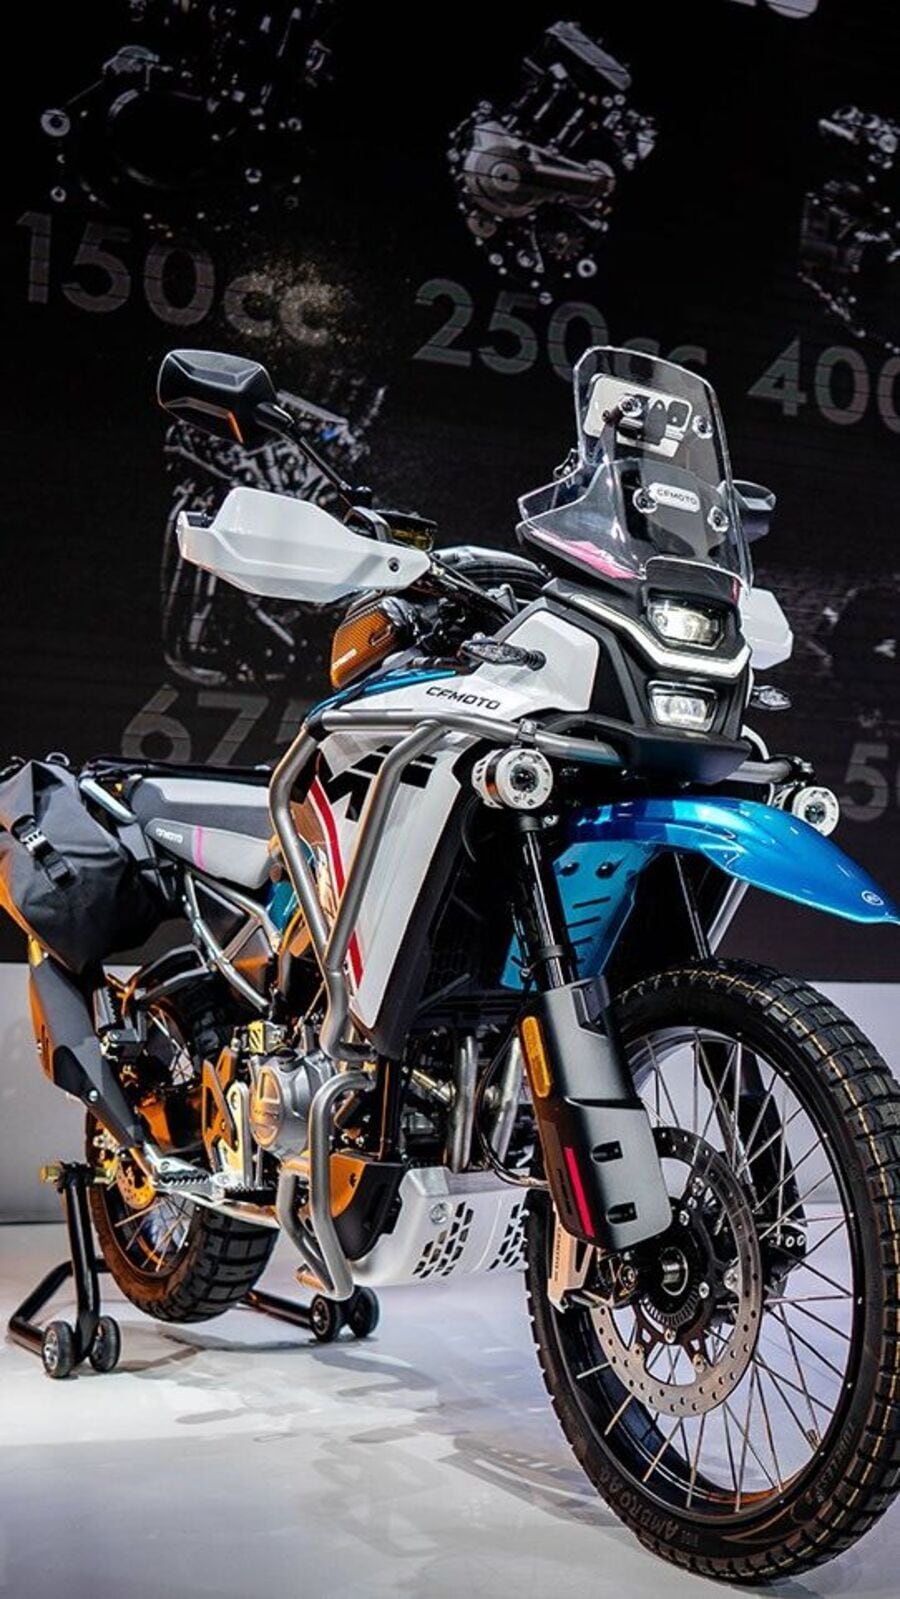 CF Moto 450MT is here to rival Royal Enfield Himalayan 450